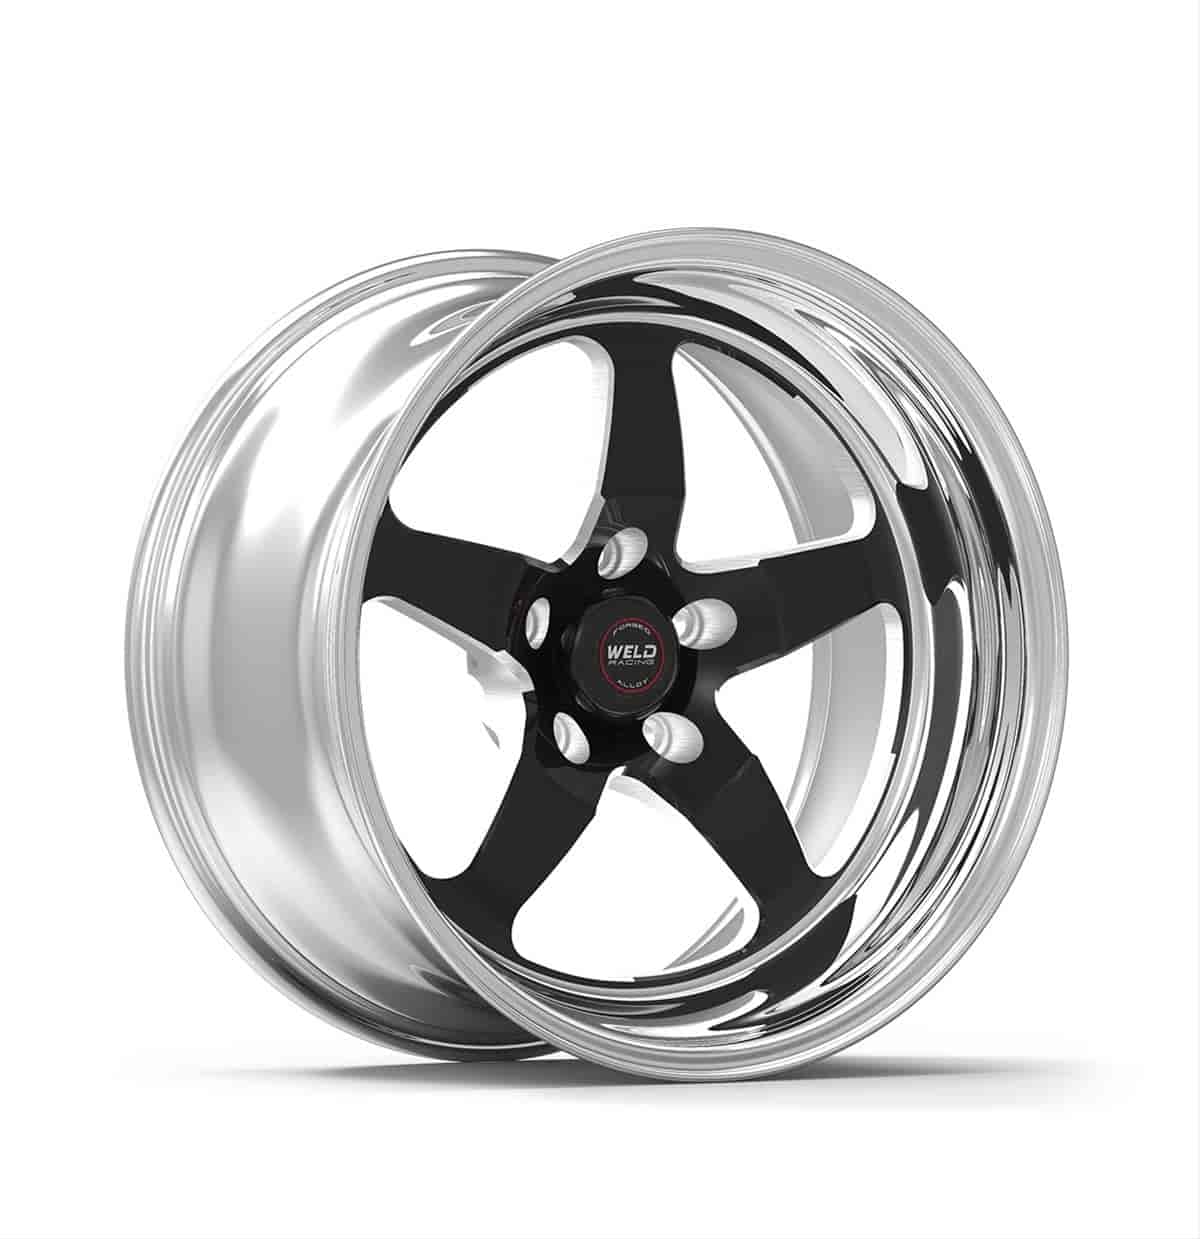 15X10.33 S71 Blk Ctr 5X4.75 6.5BS 21mm O/S